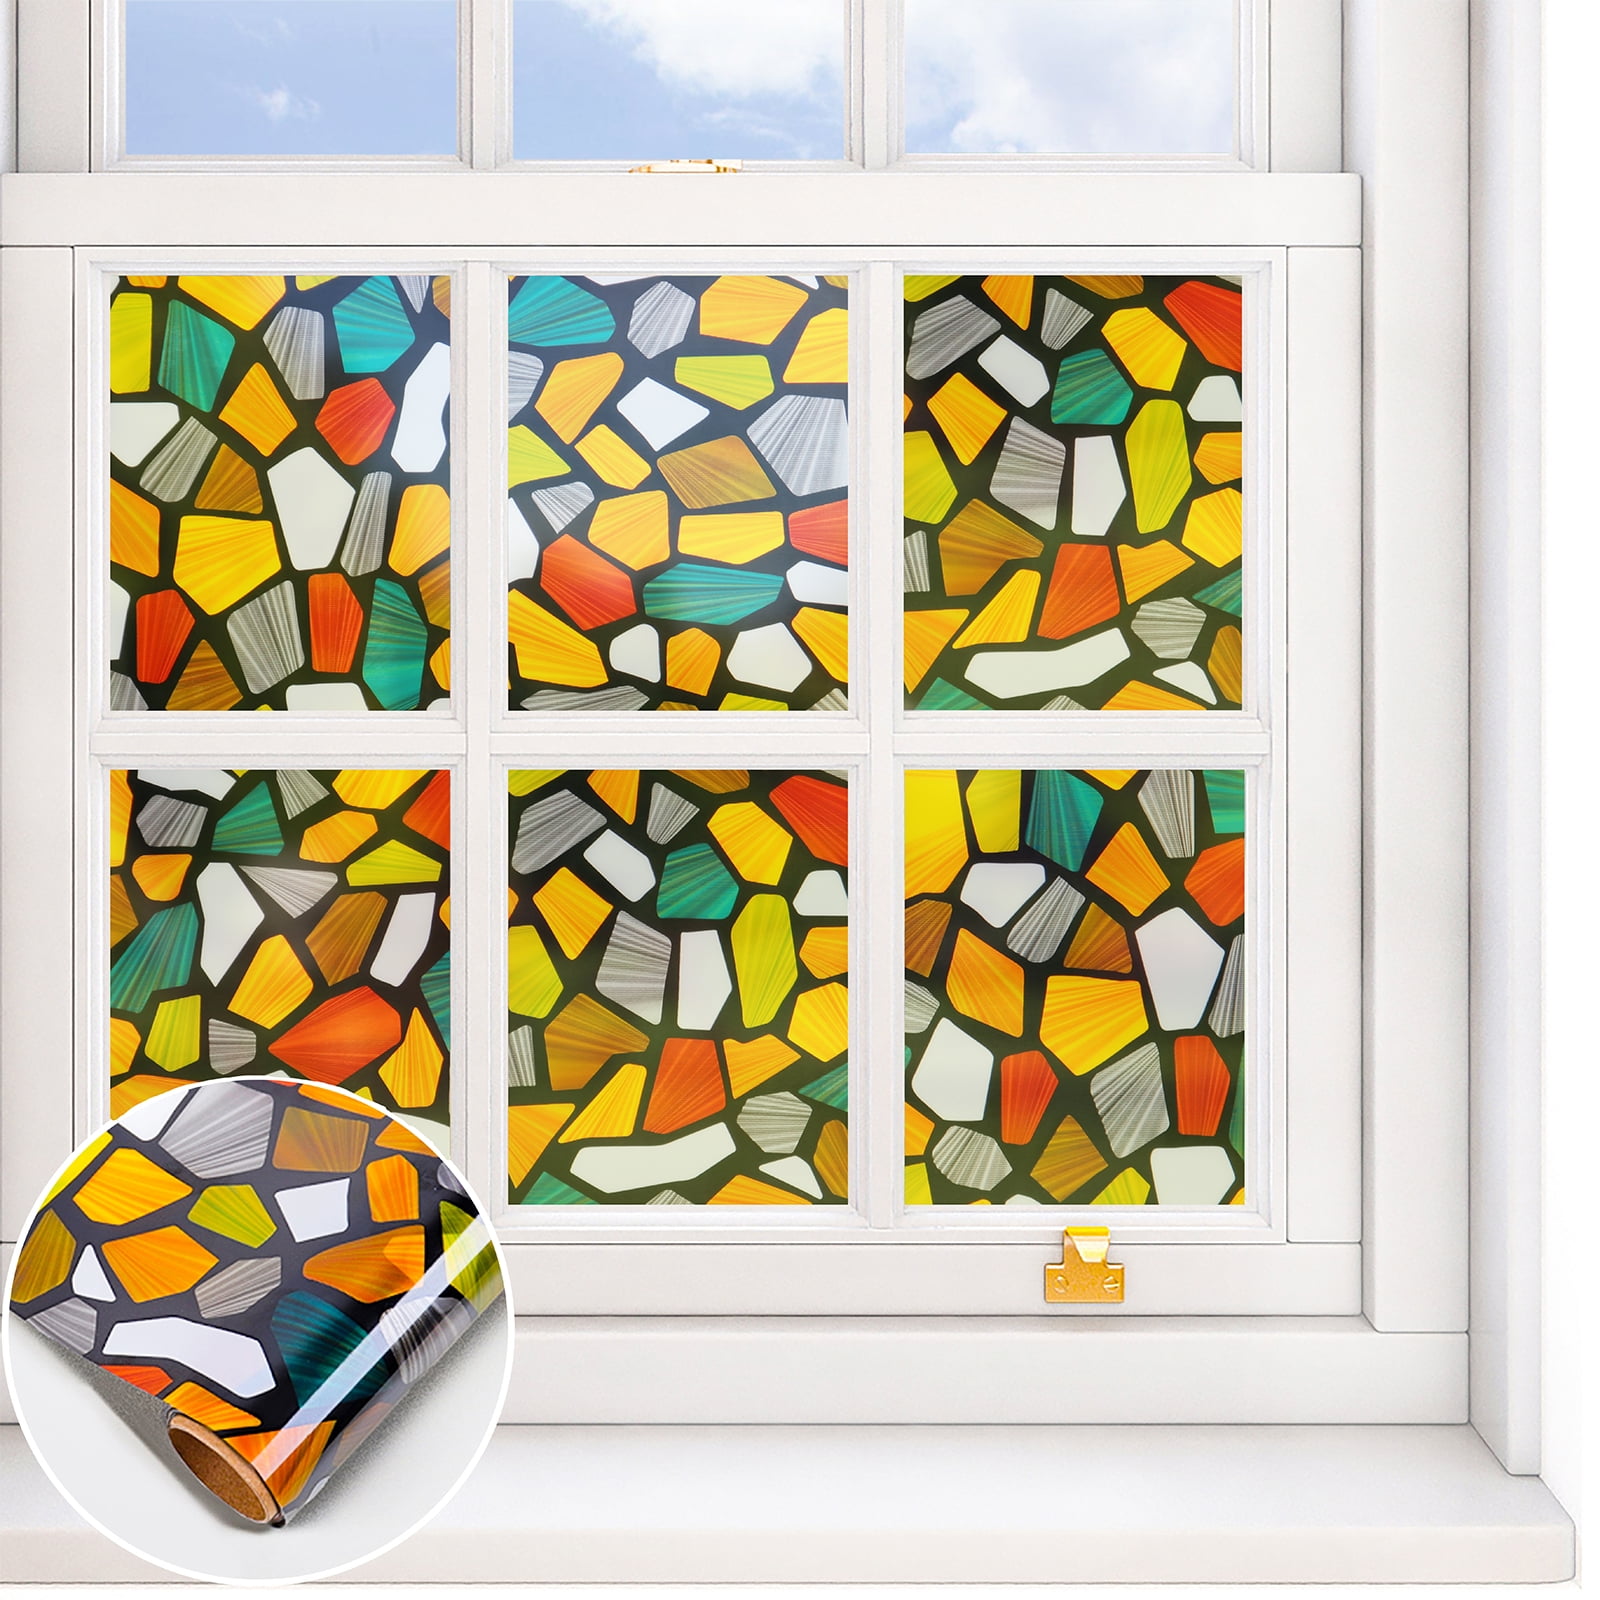 Details about   Brick Stained Window Film Tint Waterproof Vinyl Static Cling Sticker Glass Decor 